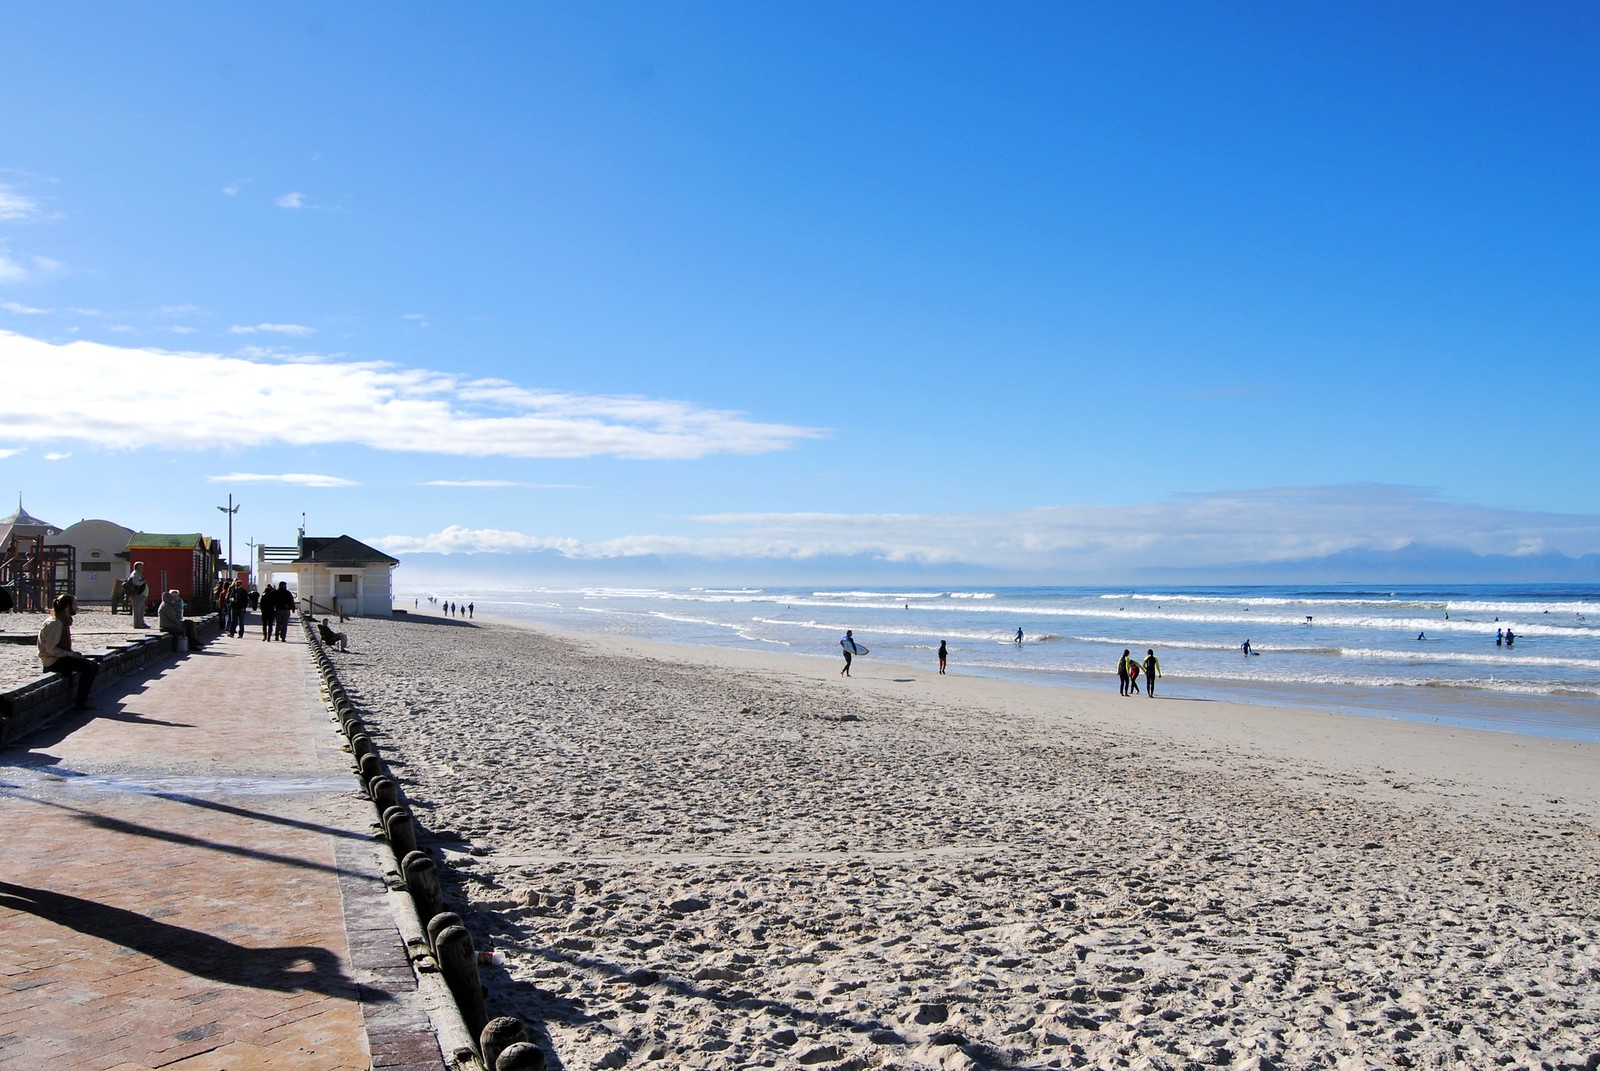 Surfers at Muizenberg Beach, South Africa.